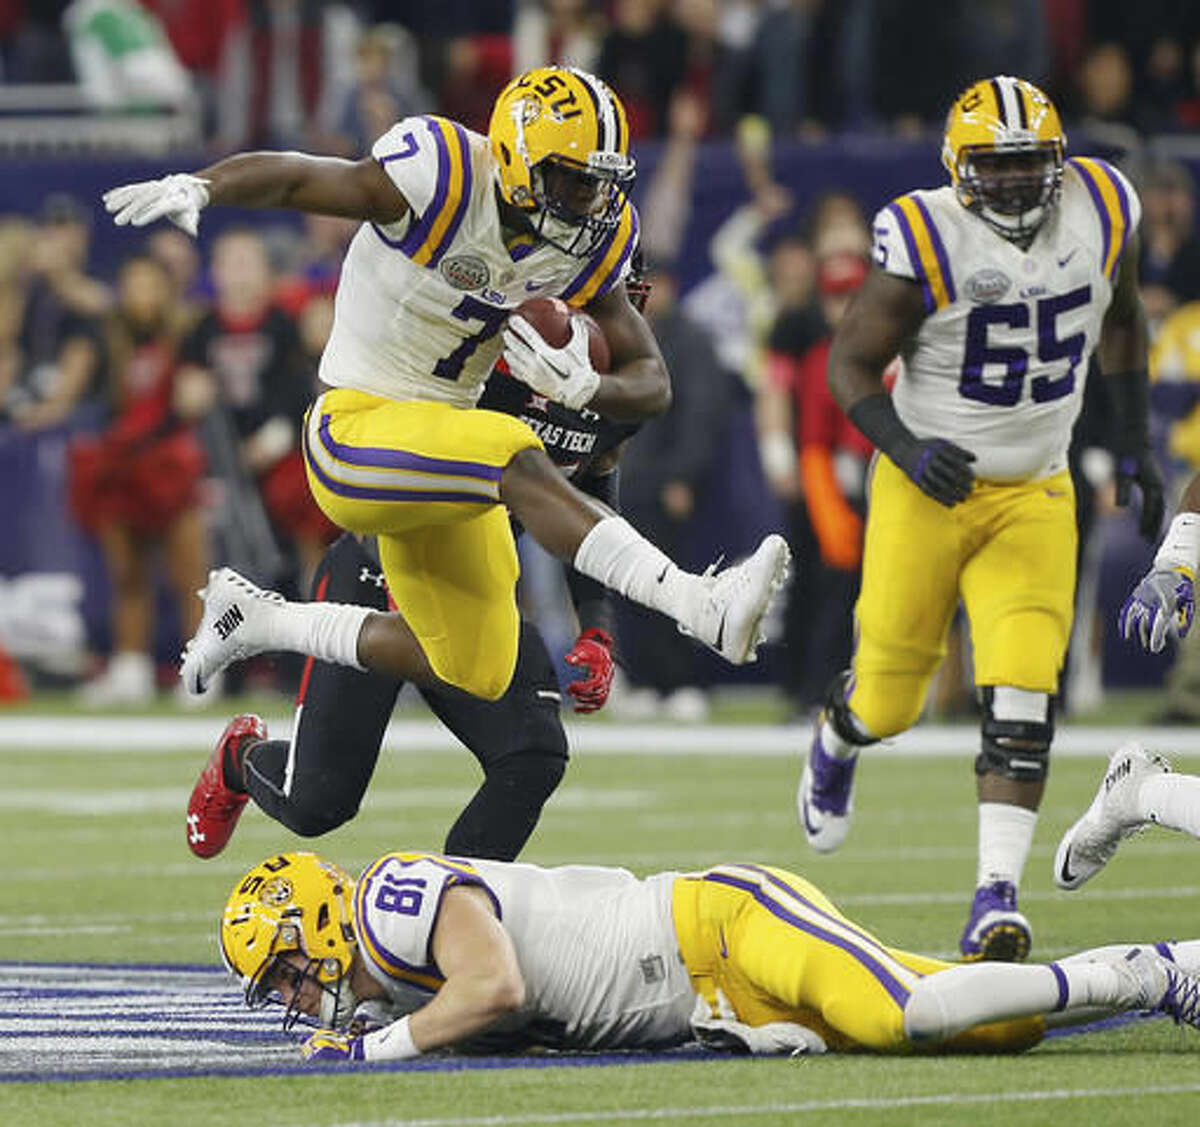 FILE - In this Dec. 29, 2015, file photo, LSU running back Leonard Fournette (7) hurdles tight end Colin Jeter (81) as he rushes against Texas Tech during the first half of the Texas Bowl NCAA college football game in Houston. Lately, the 25th-ranked Tigers have spread out formations and scored on a variety of big plays, and now it appears running back Leonard Fournette could return to the mix for this weekend's clash with No. 23 Mississippi. (AP Photo/Bob Levey, File)